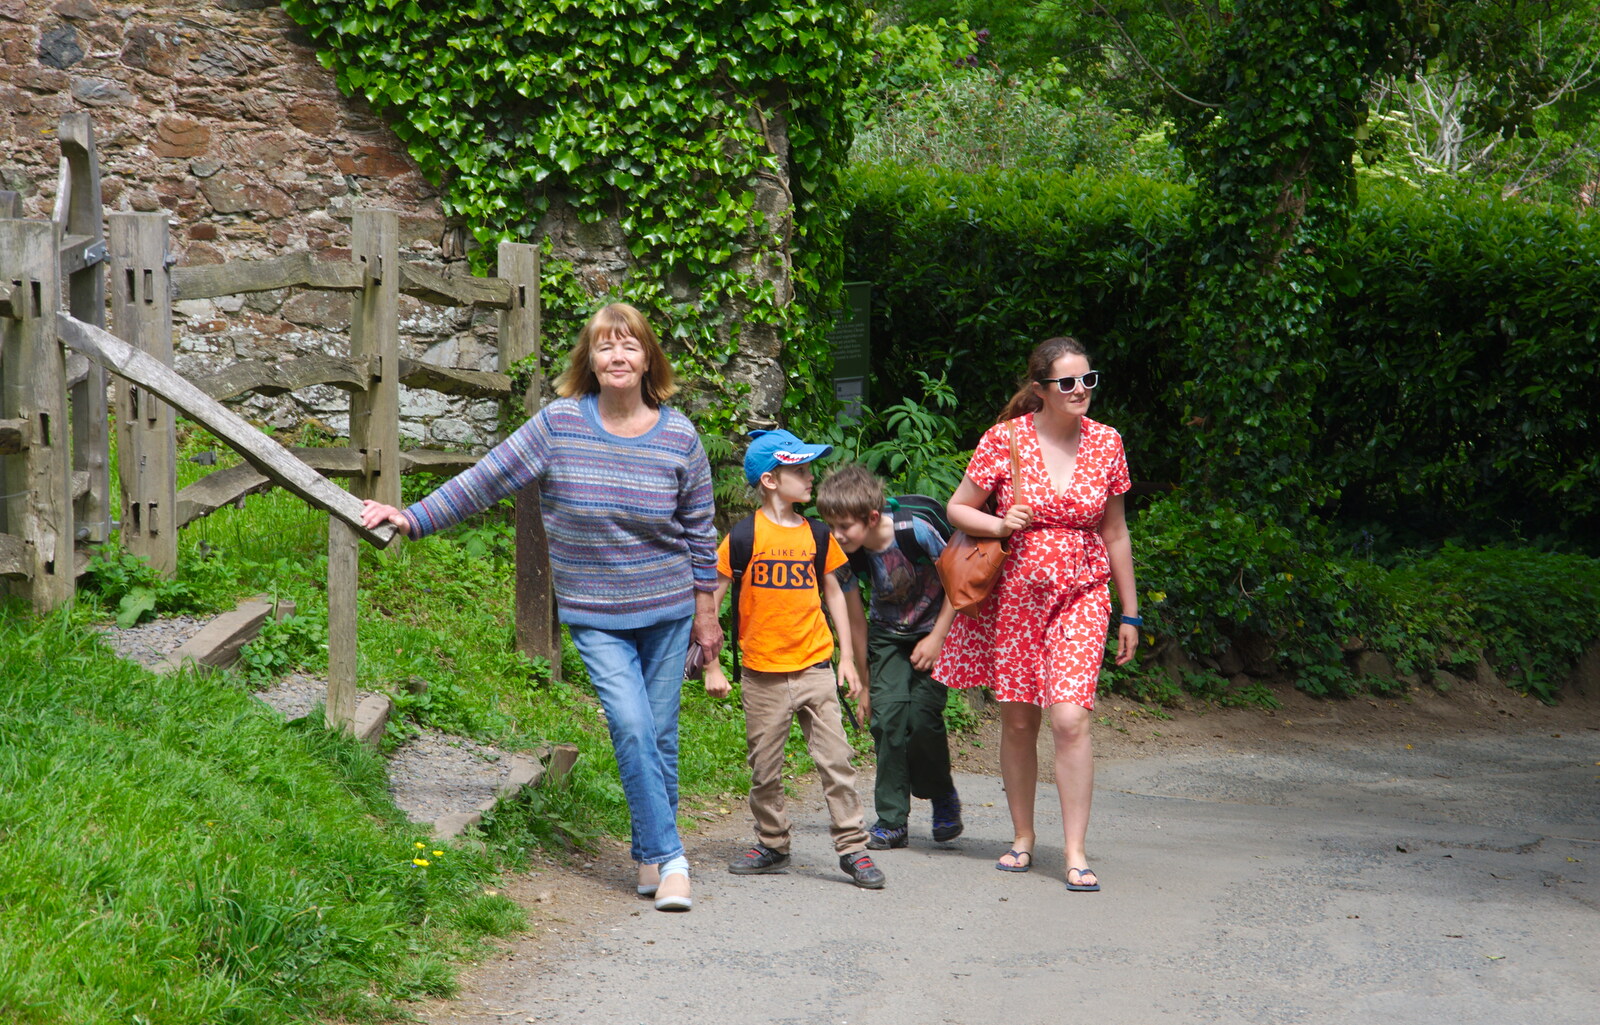 Stomping up the steep hill back to the car park from Chagford Lido and a Trip to Parke, Bovey Tracey, Devon - 25th May 2019